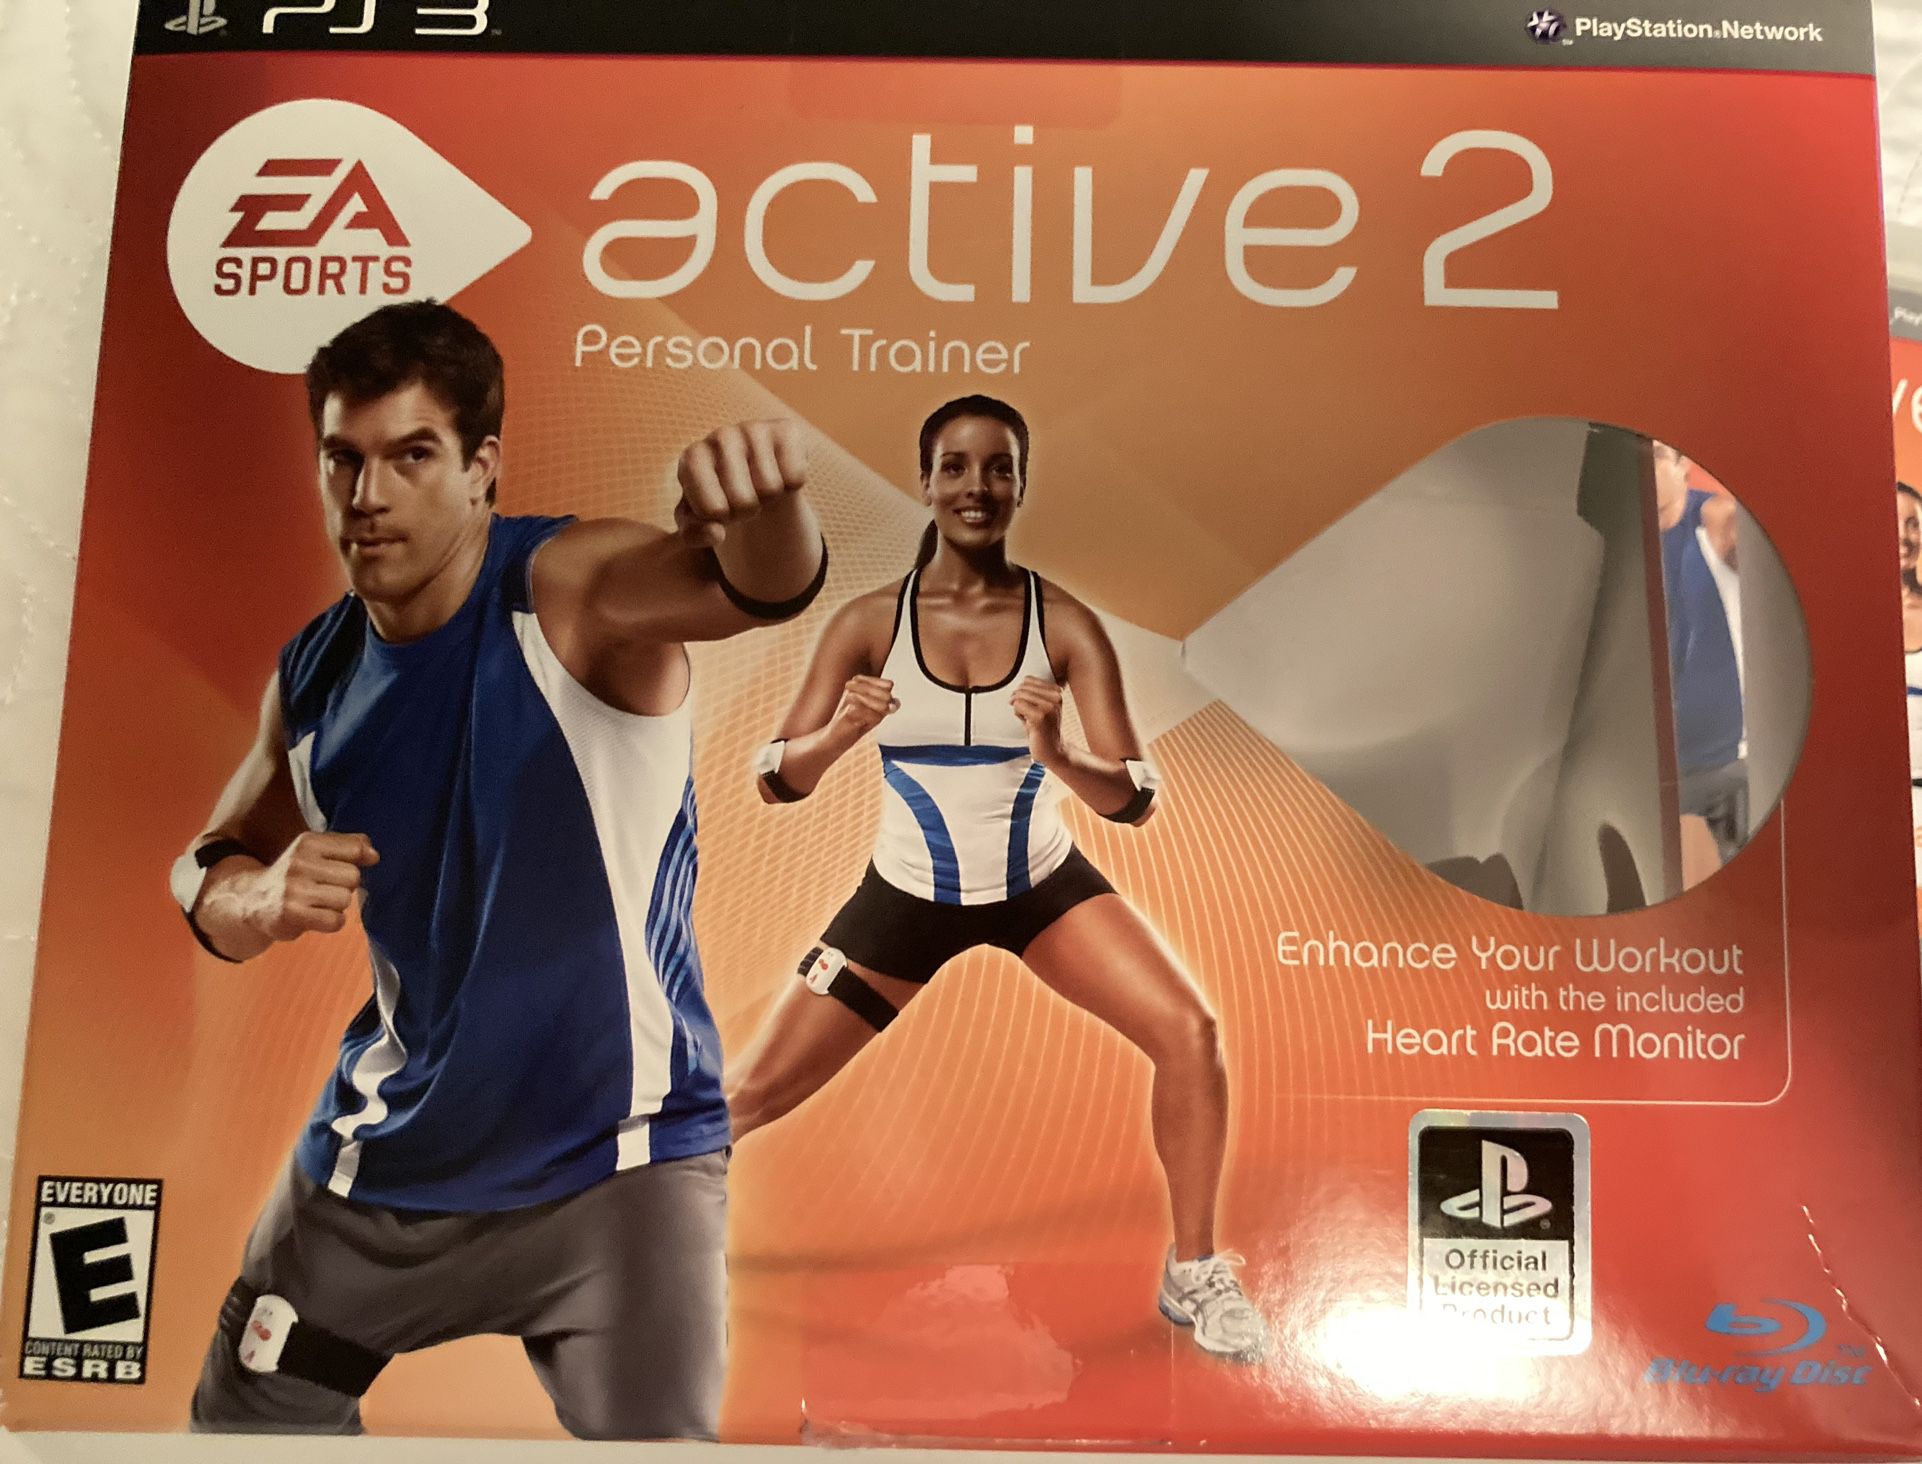 PS3 EA SPORTS ACTIVE 2 PERSONAL TRAINER 